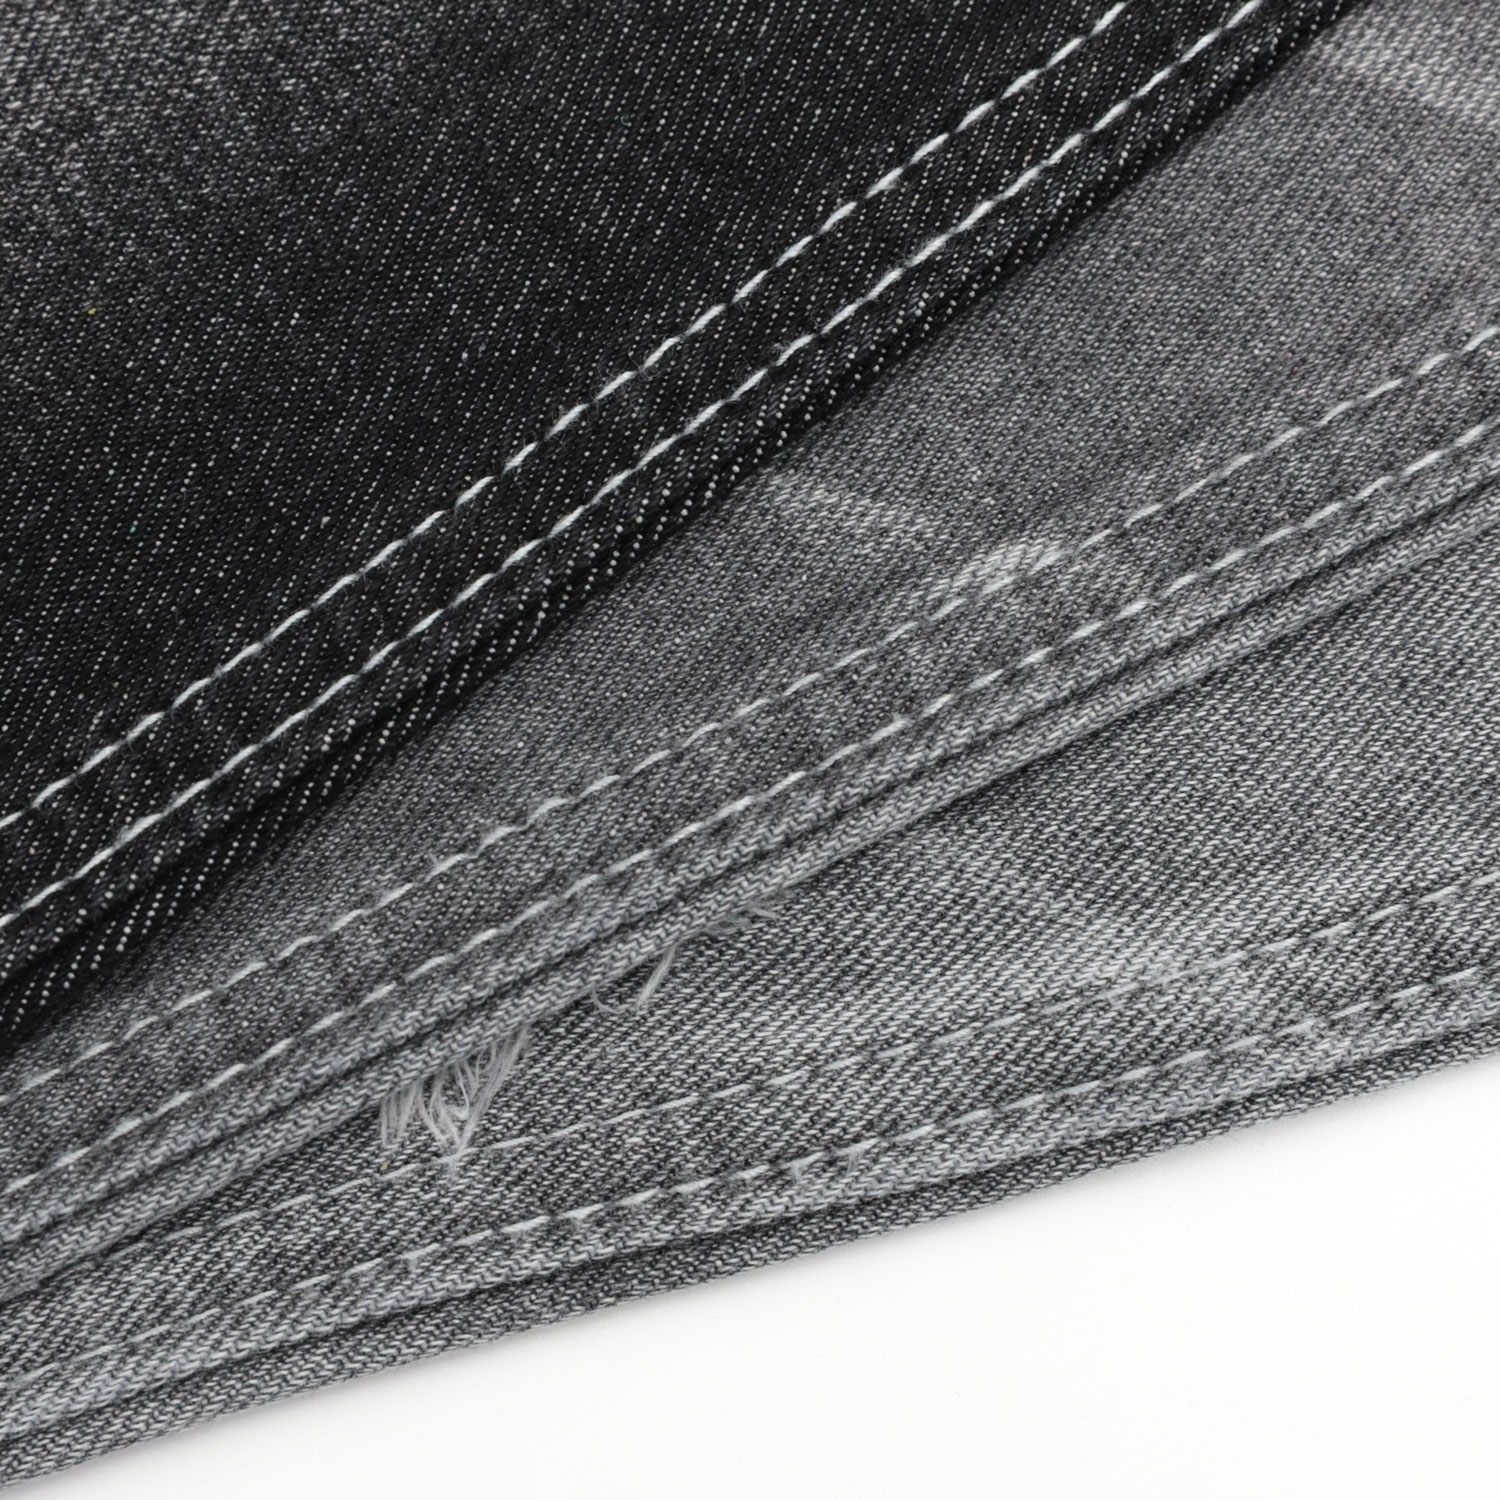 Denim Wholesale Fabric: Are They Worth It? 2